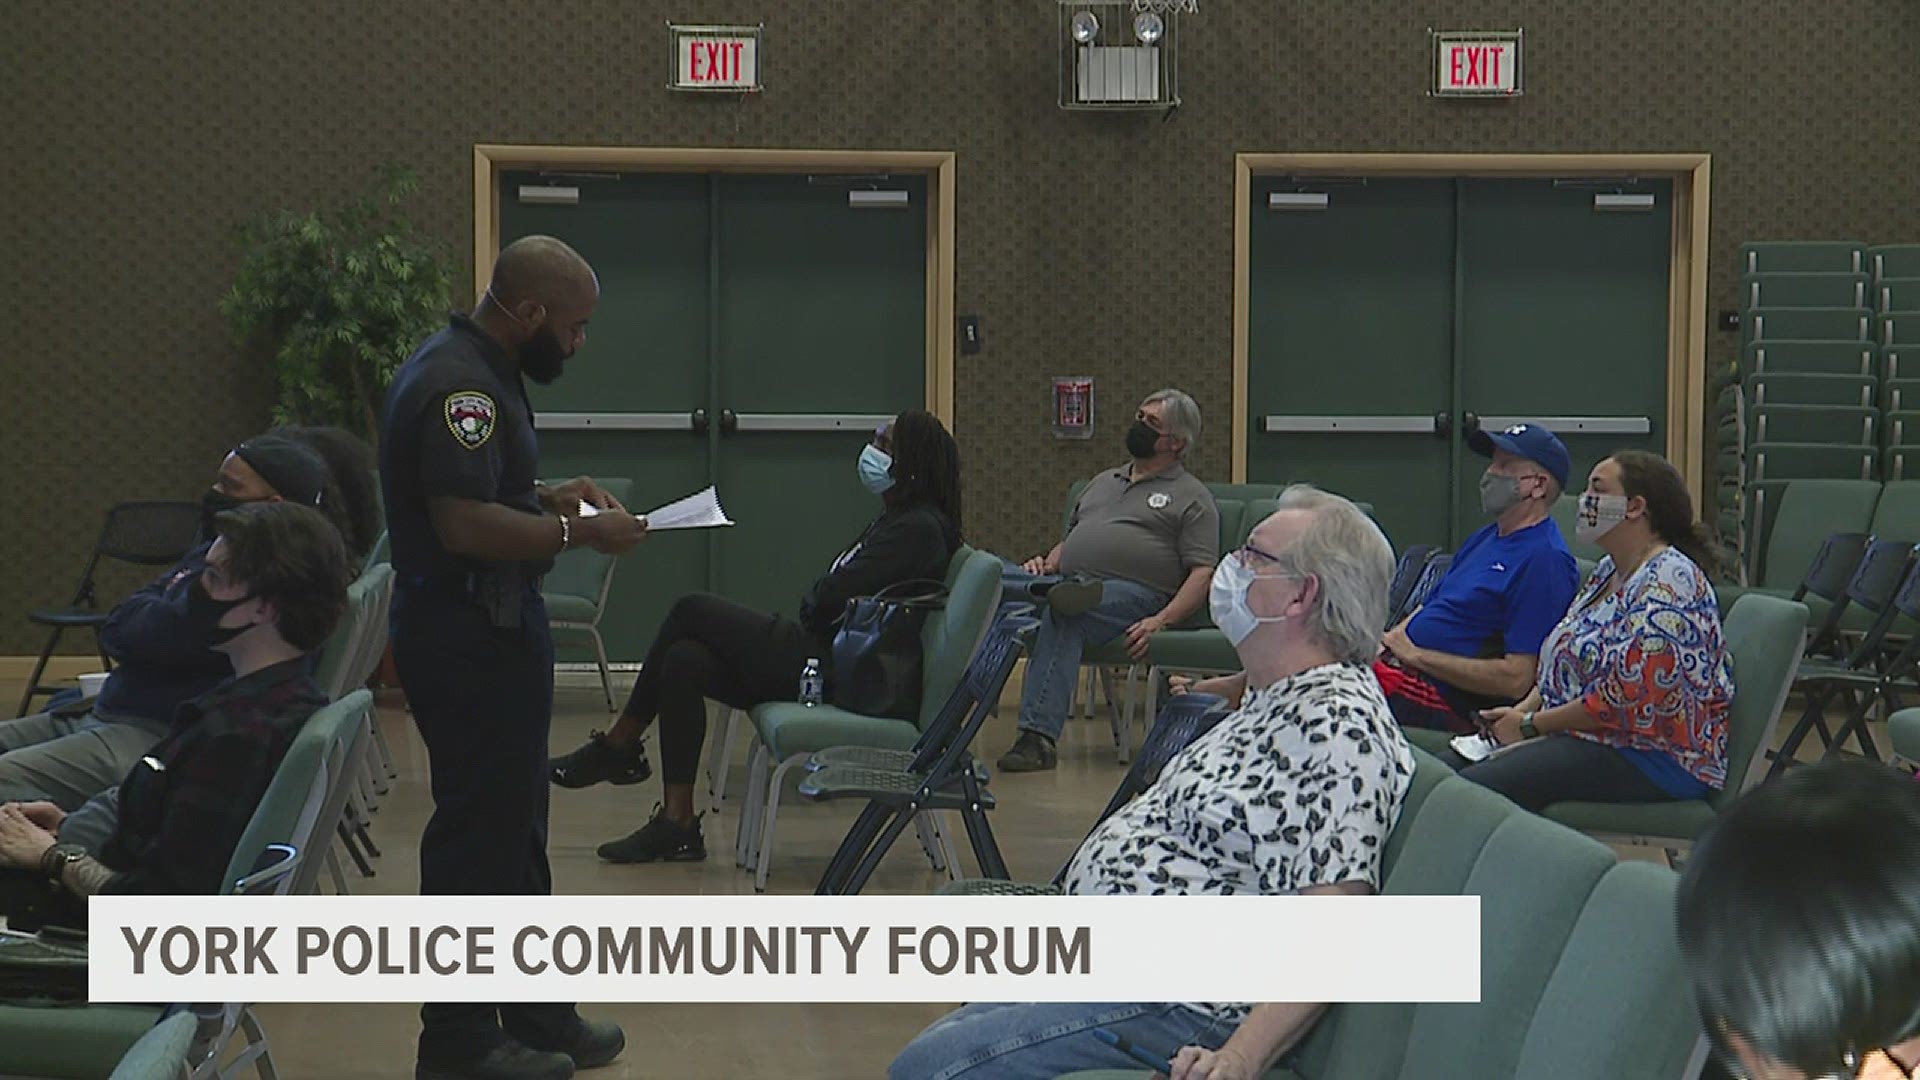 The York City Police Department held its second public forum in an effort to build honest communication between community members and police.